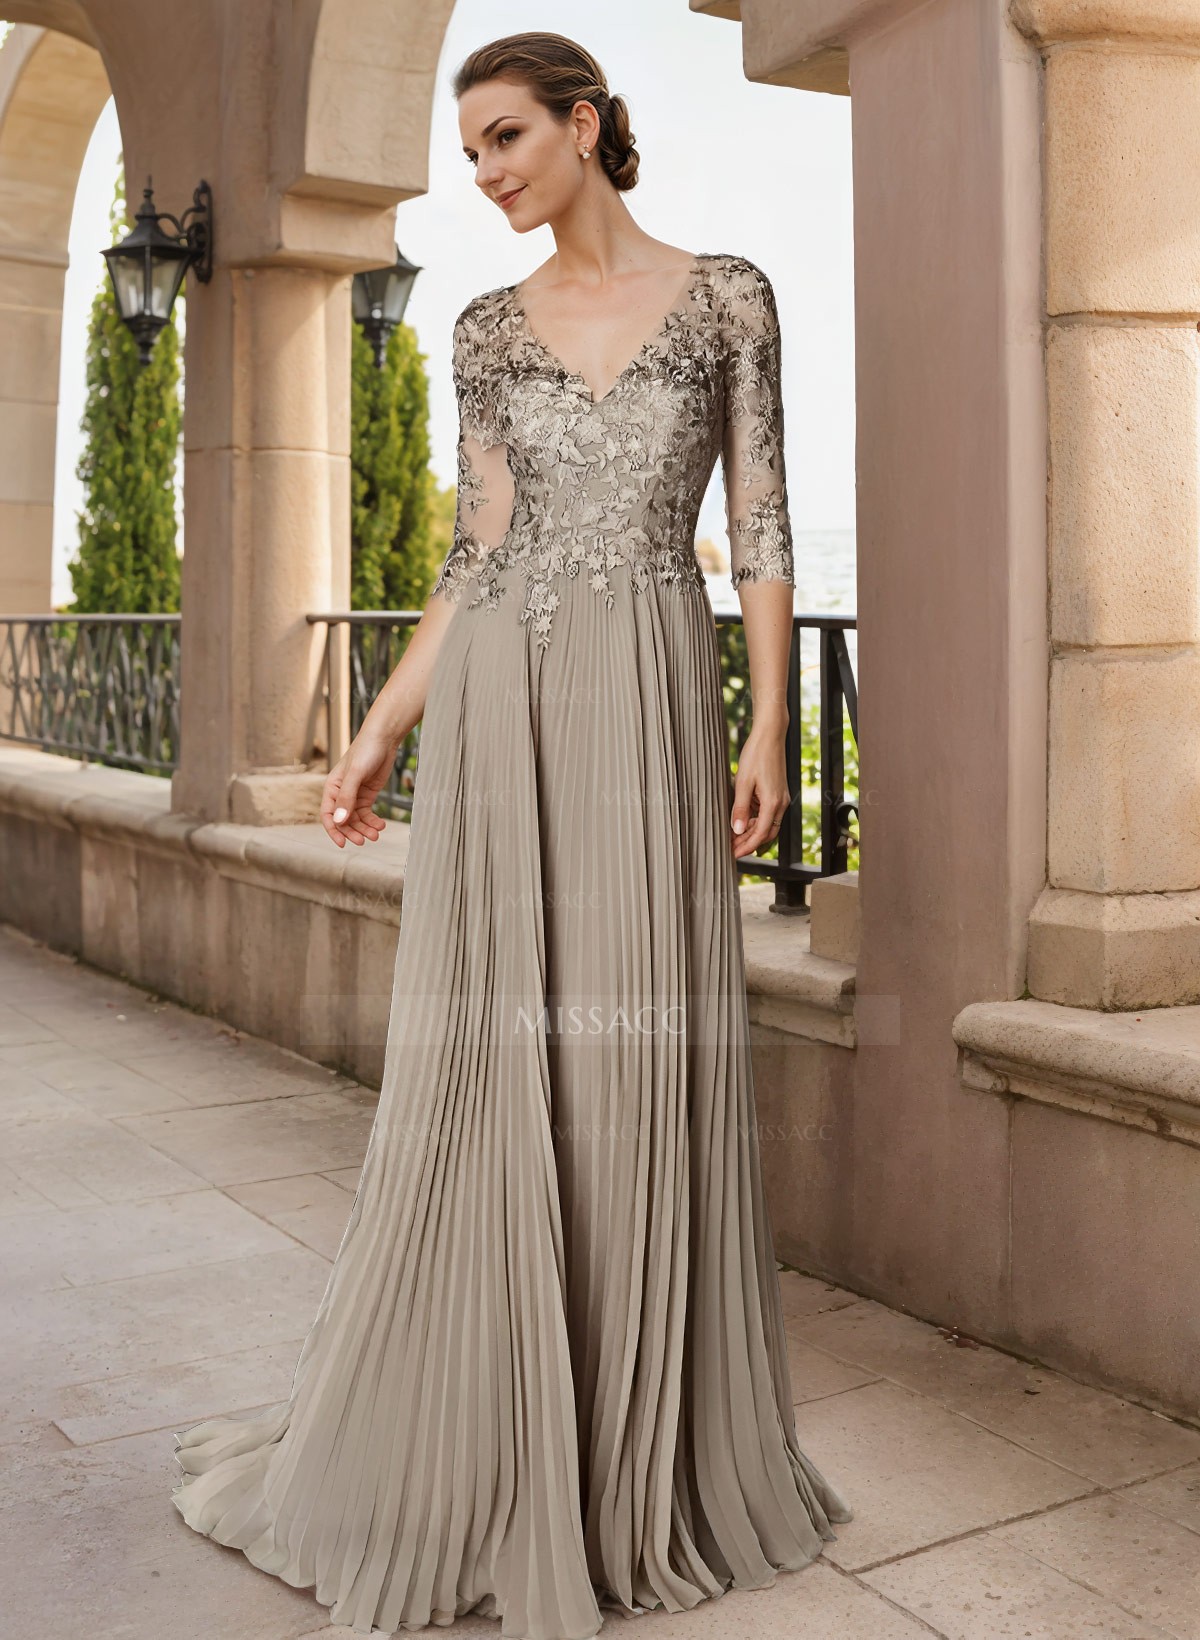 A-Line V-Neck Floor-Length Chiffon Mother Of The Bride Dresses With Lace Pleated